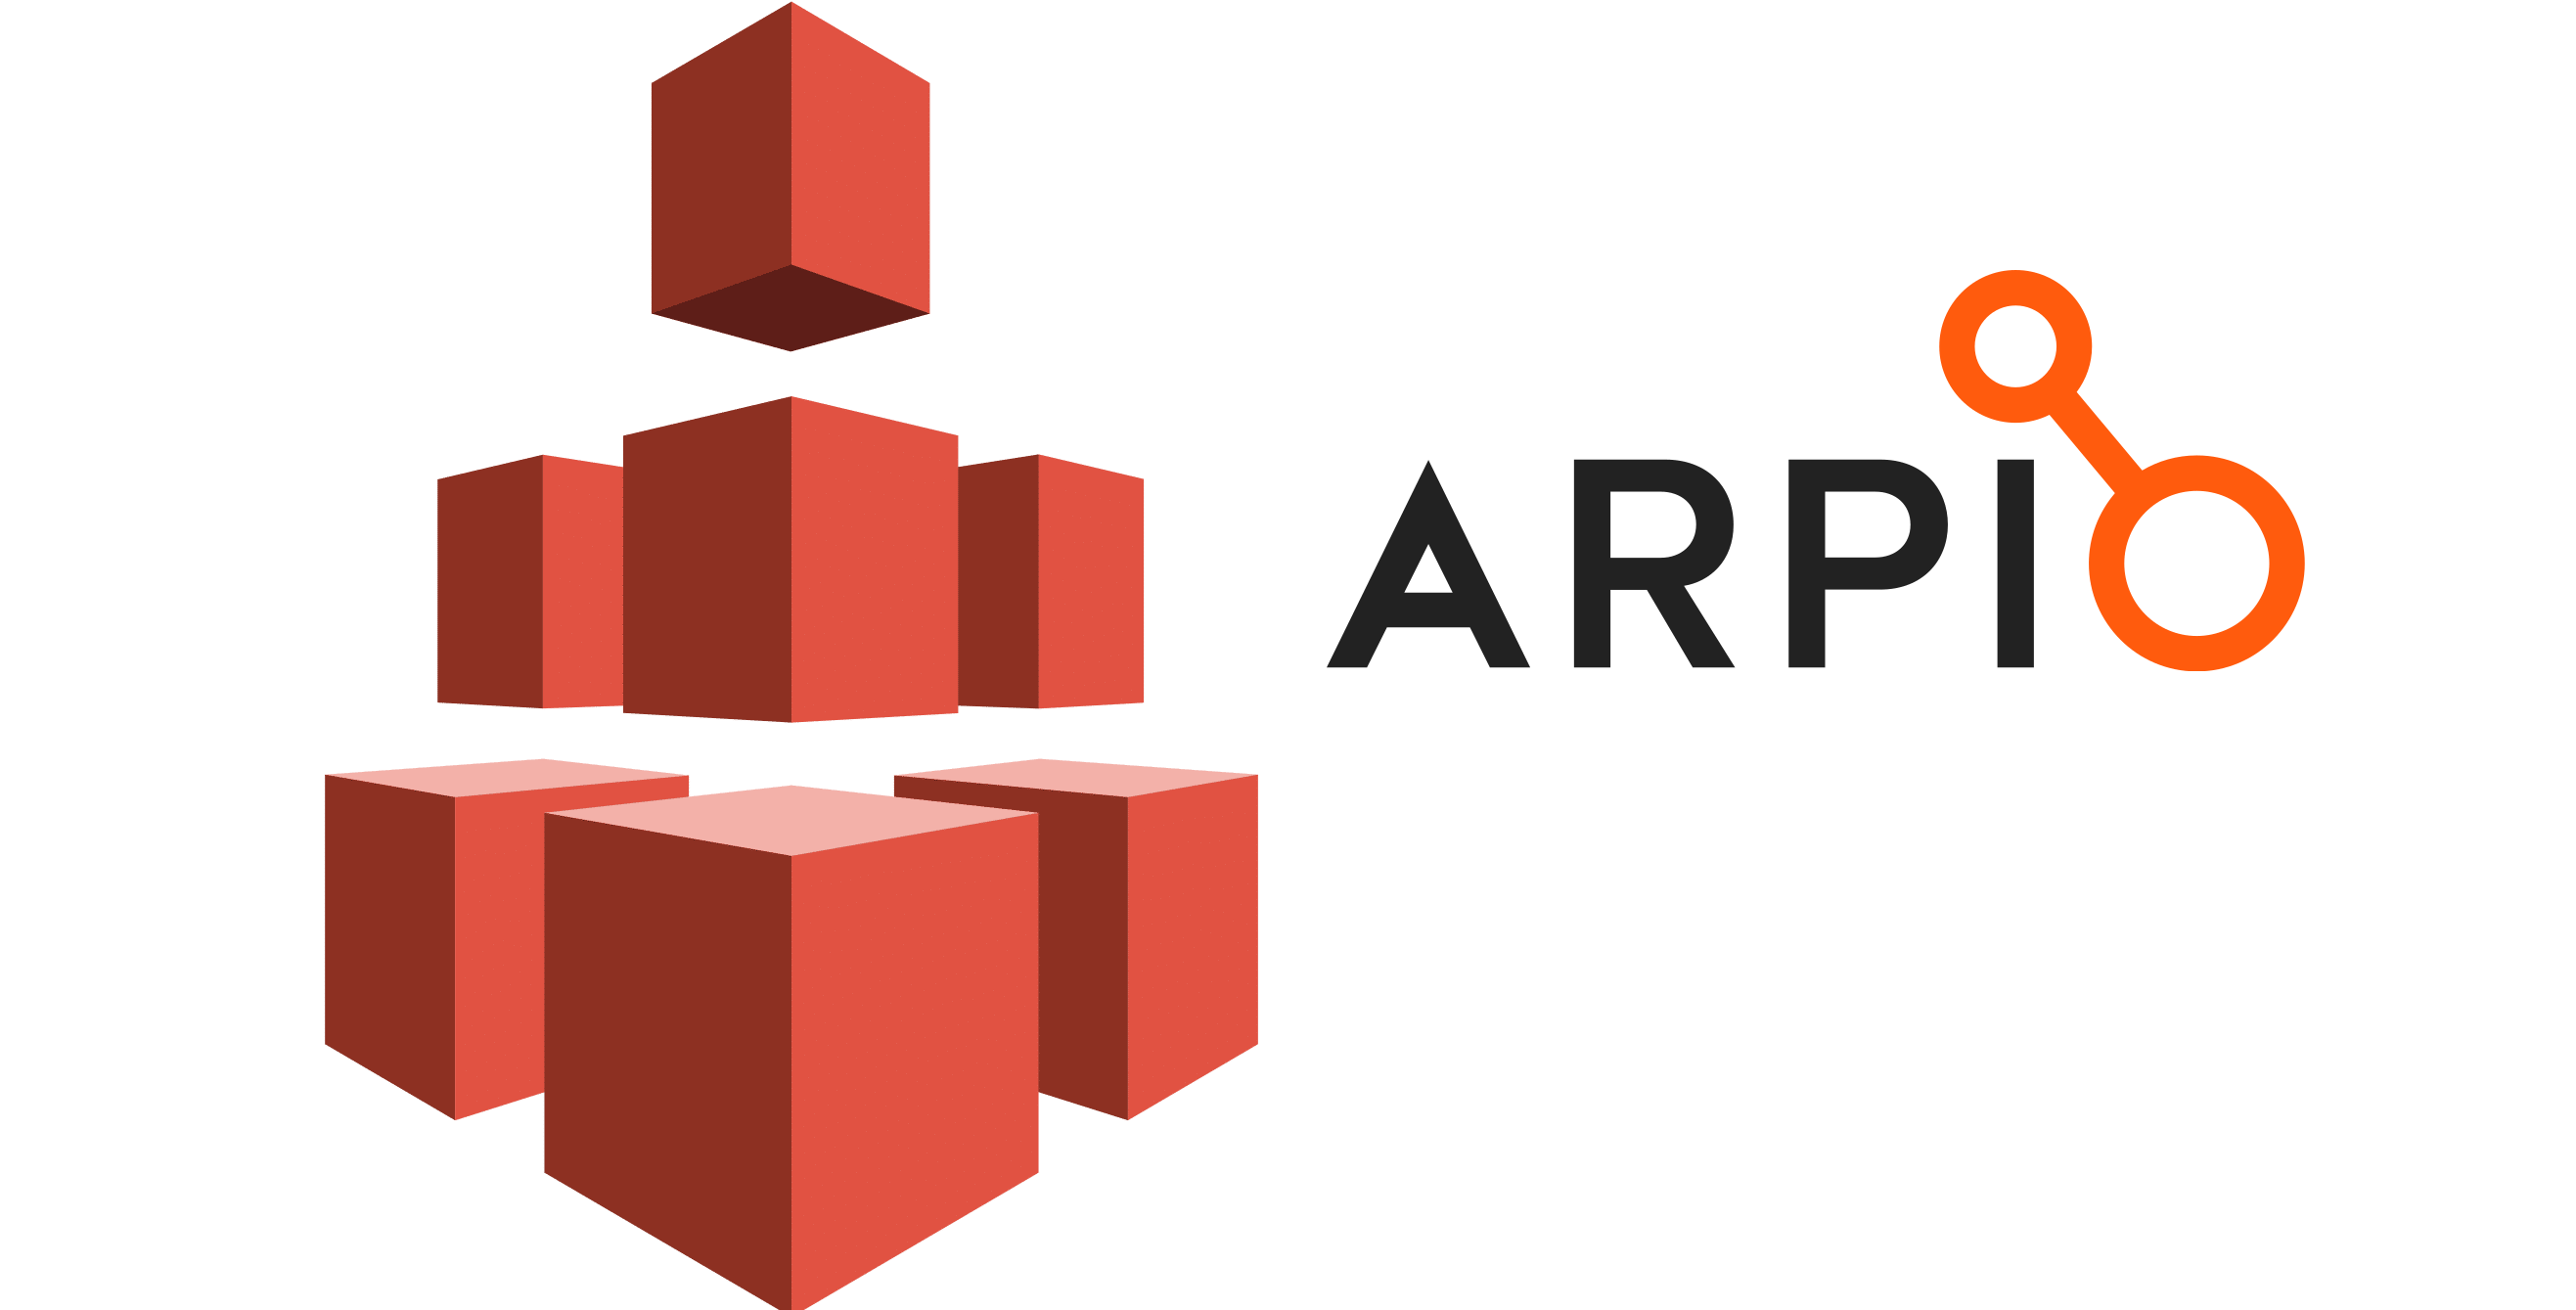 Disaster Recovery for Amazon’s Elastic File System (EFS) now available with Arpio!